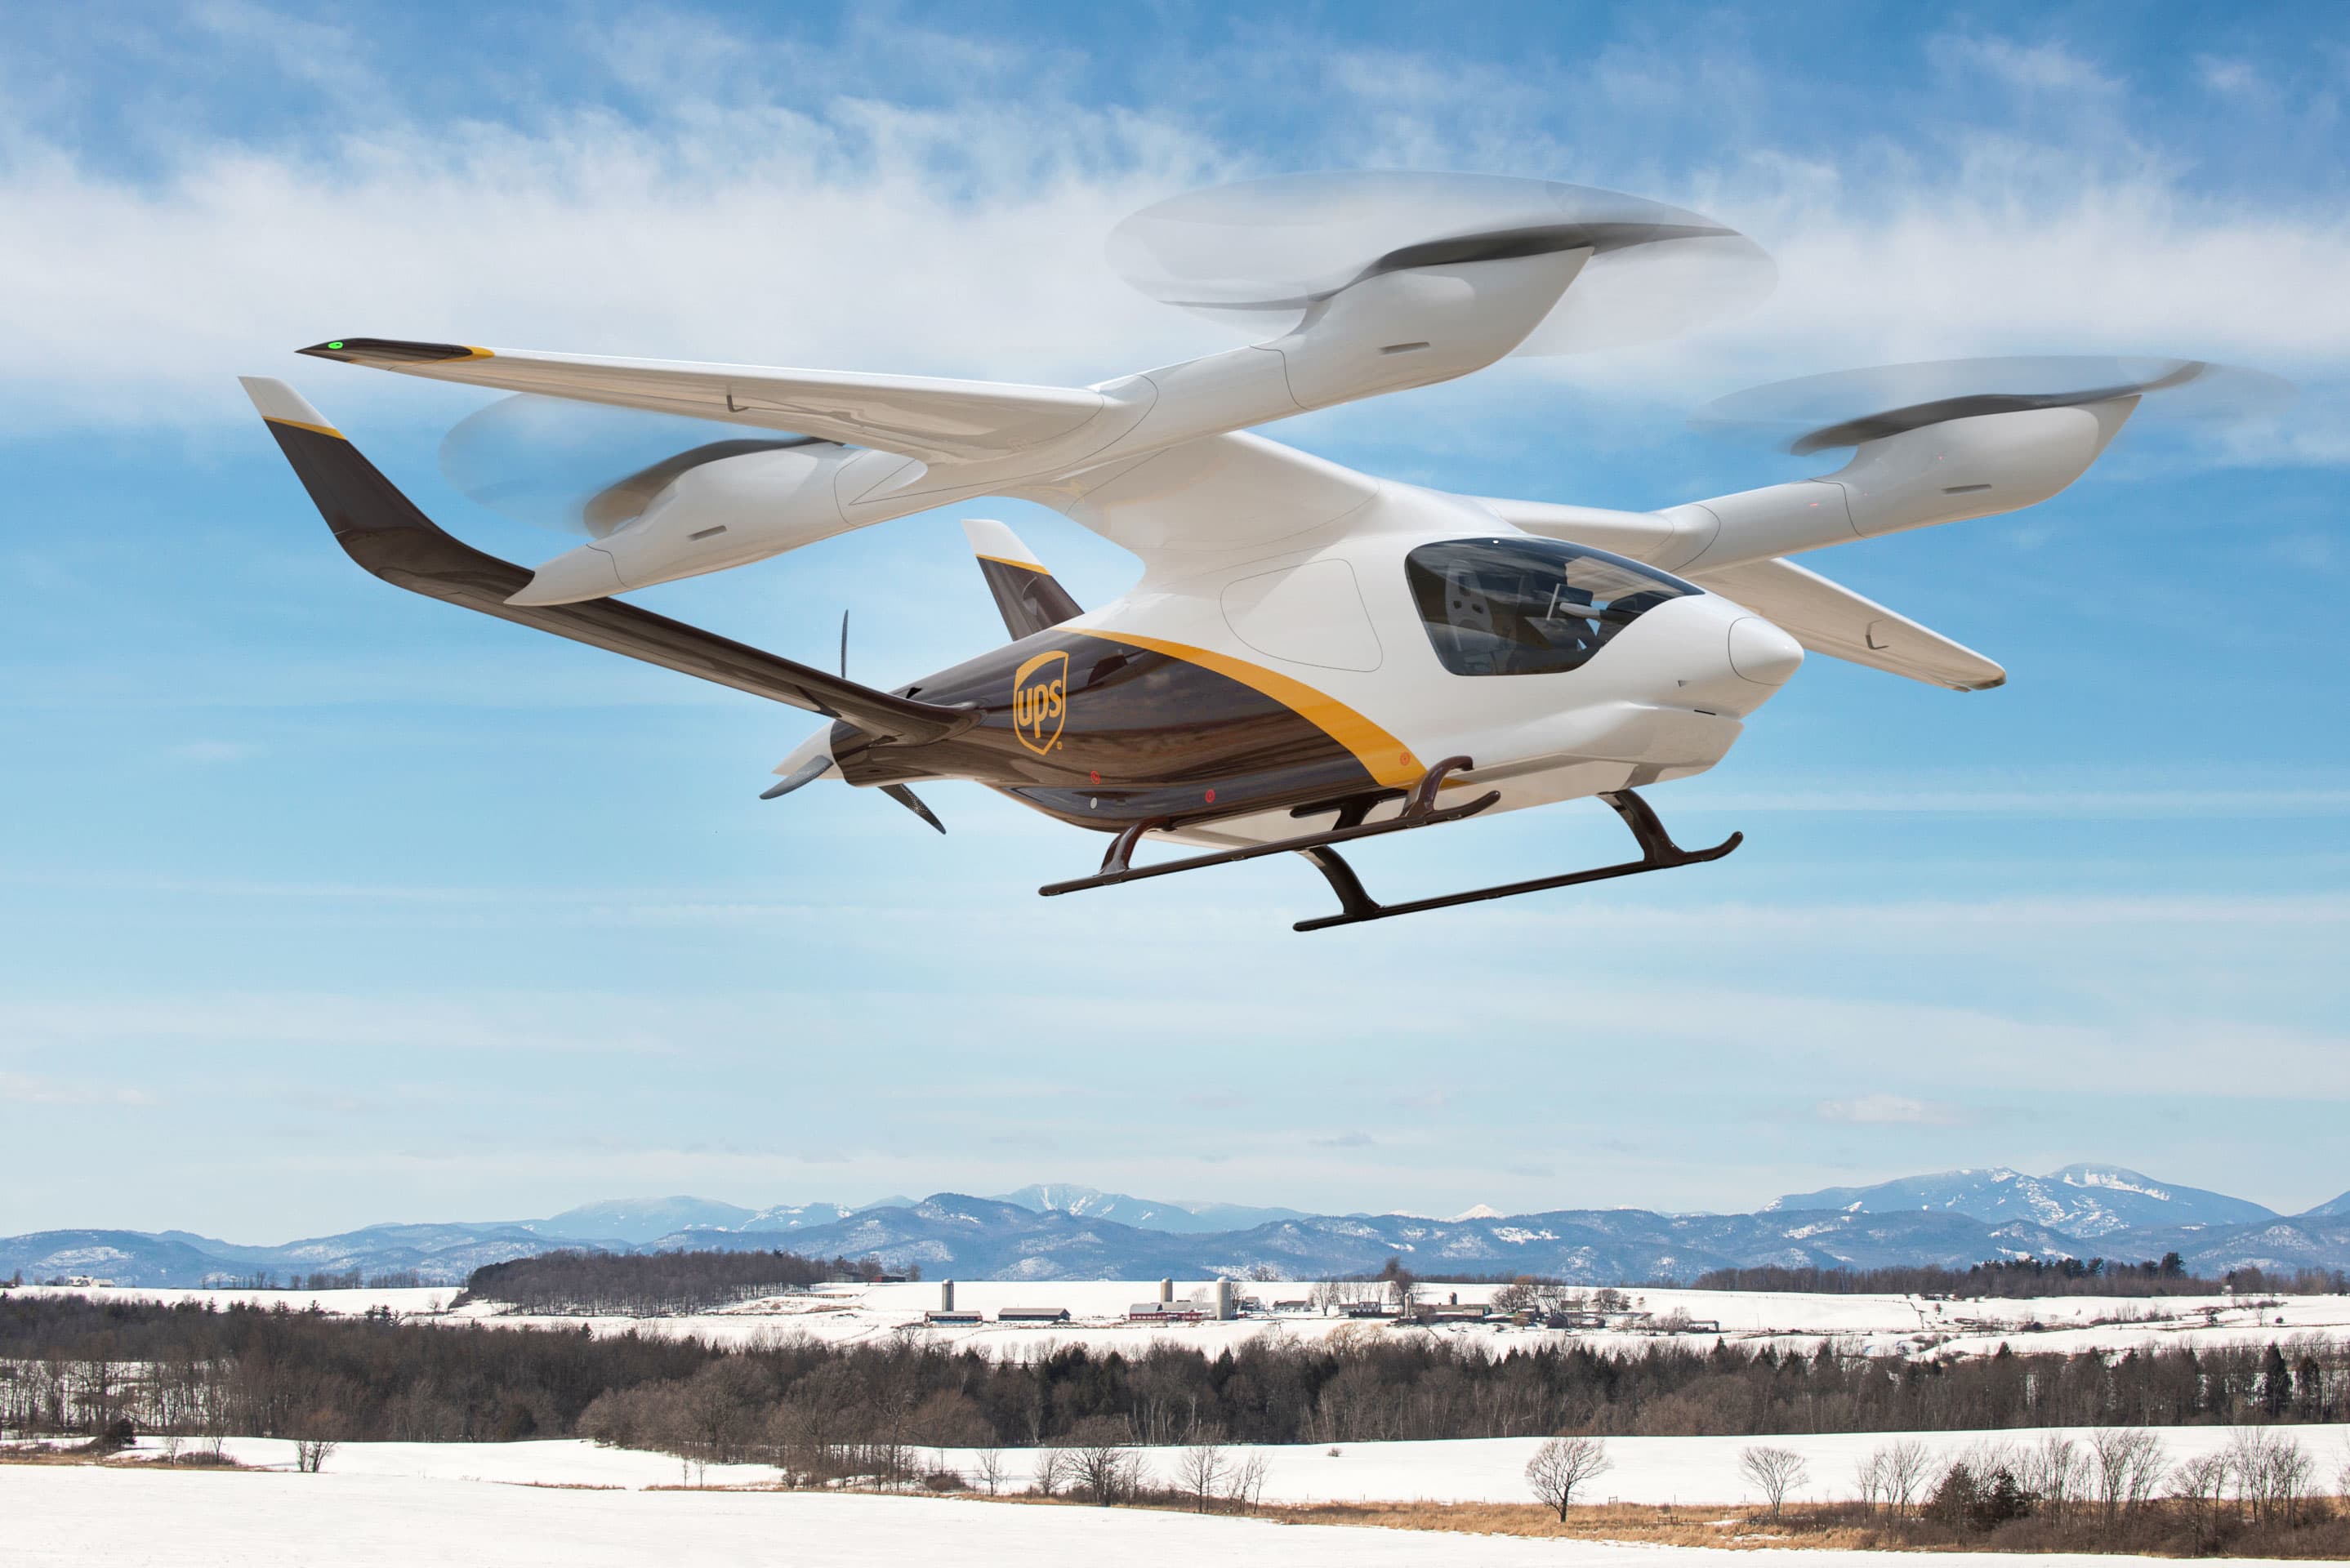 UPS buys eVTOL aircraft to speed up package delivery in small markets